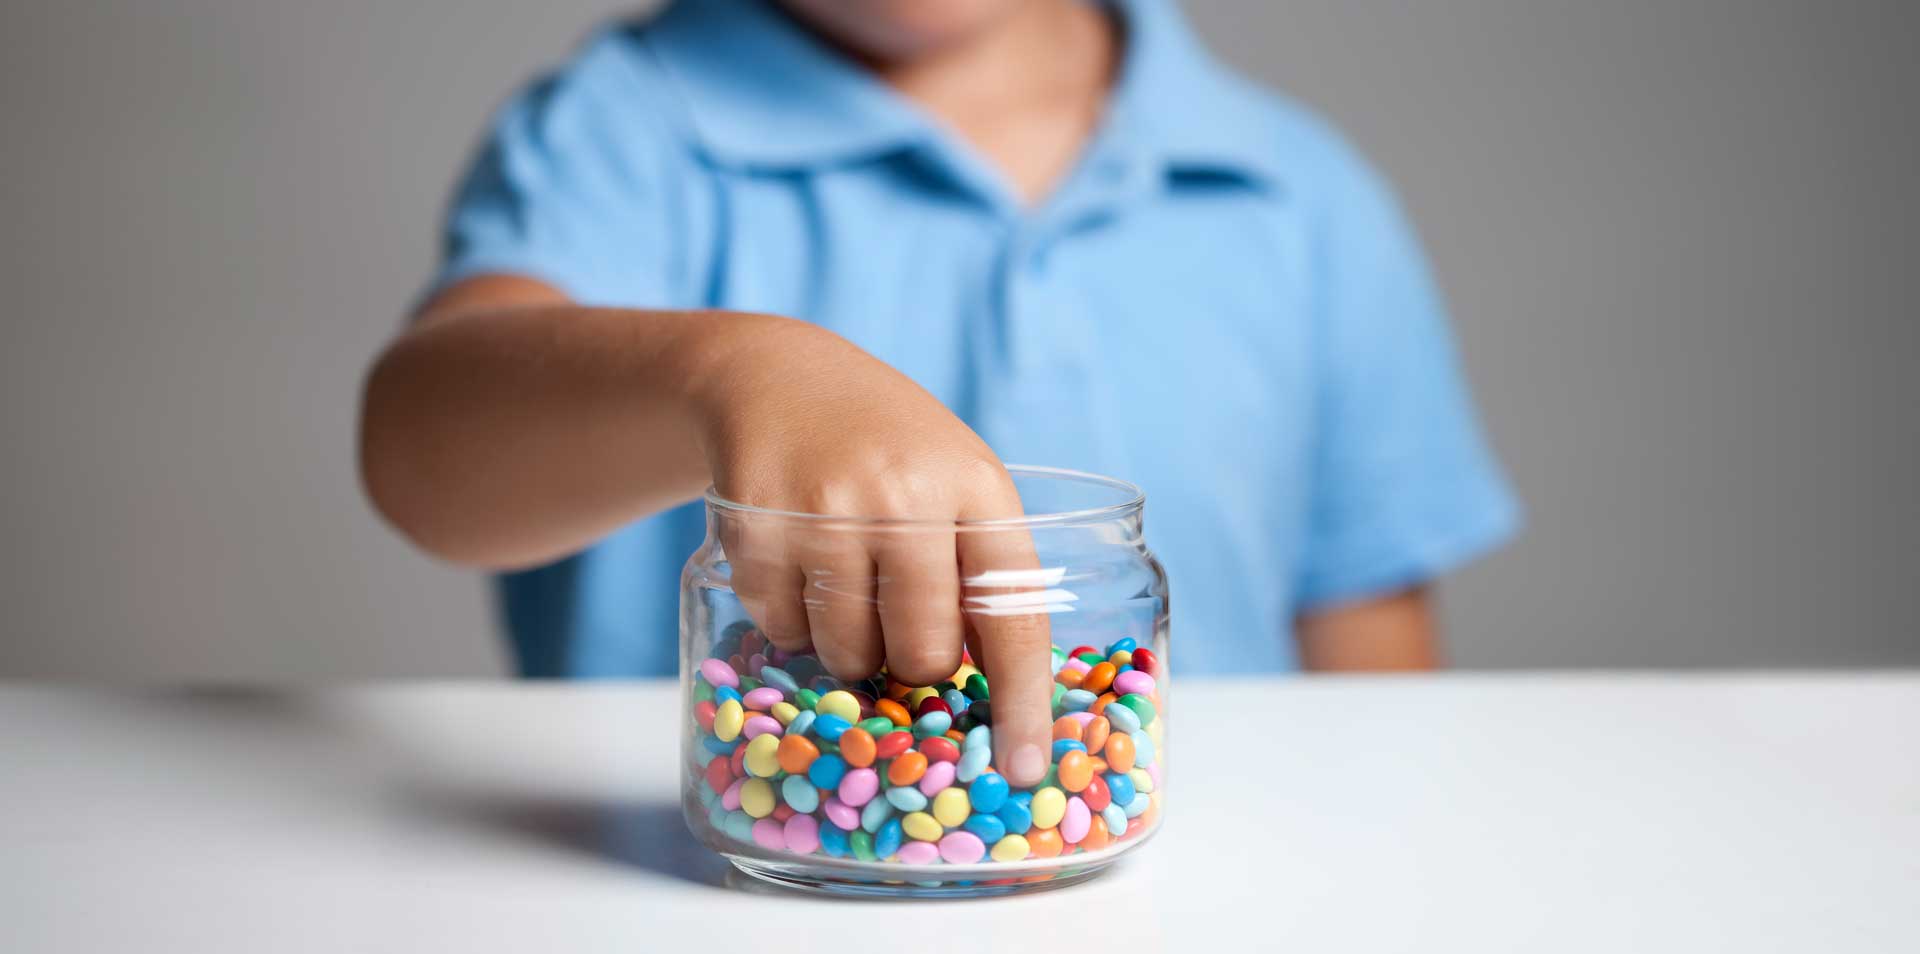 A child with his hand in the sweet jar